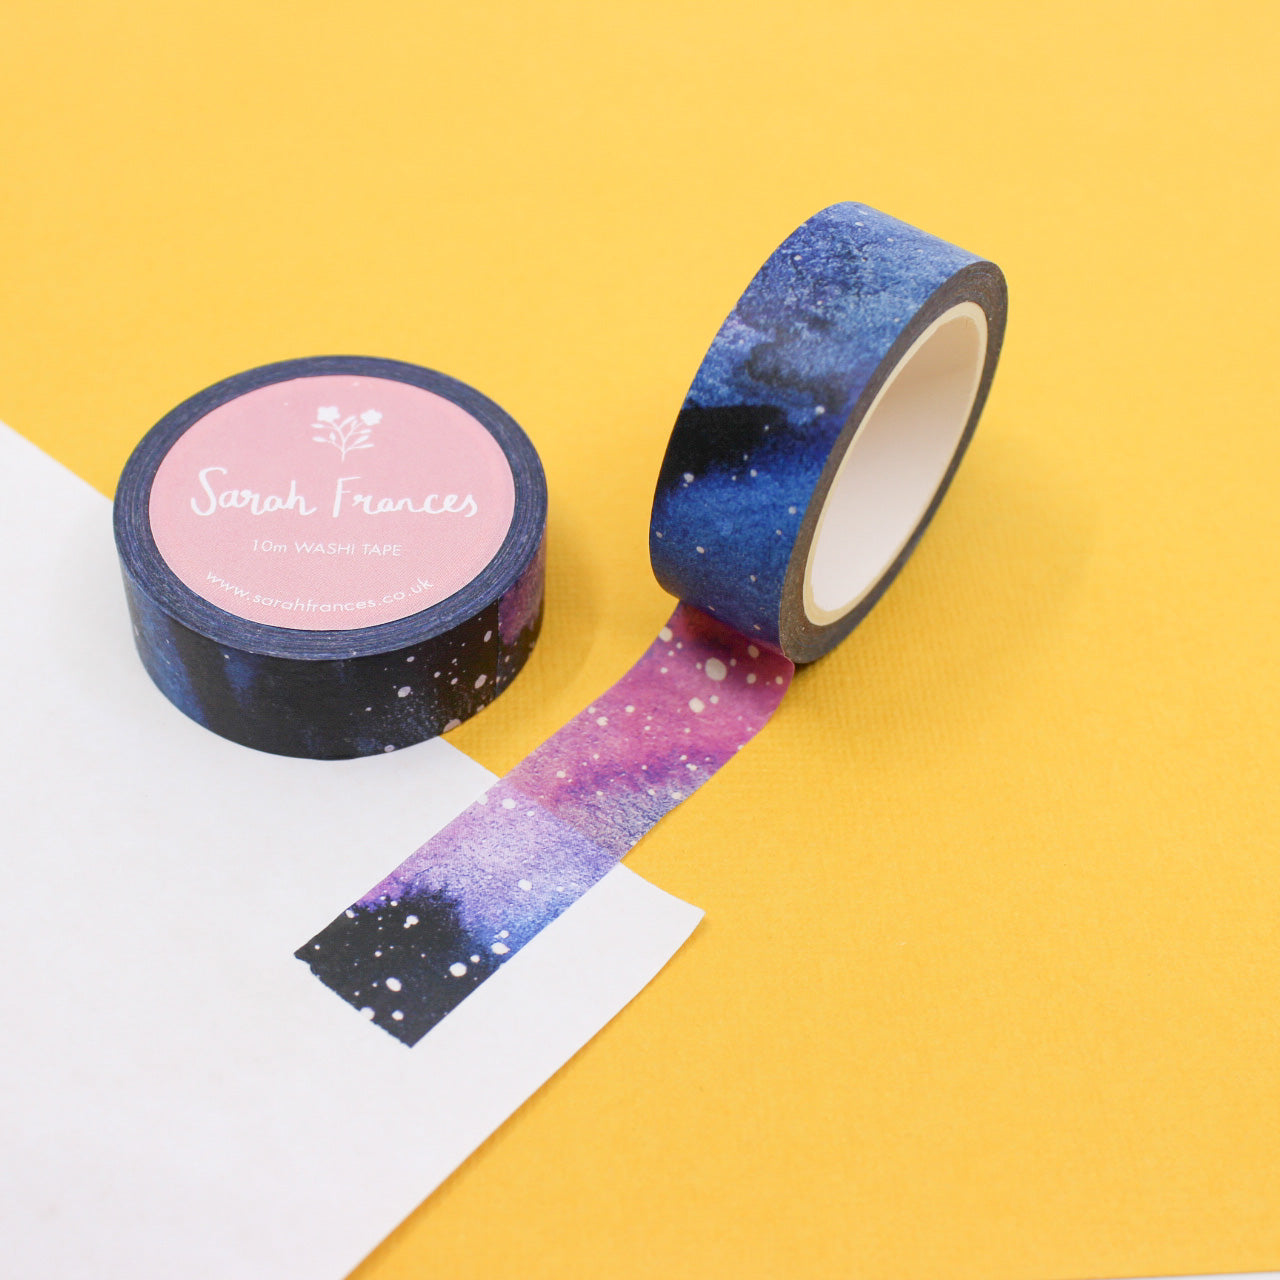 This washi tape is a purple and blue galaxy night sky with stars. It is from Sarah Frances Designs and sold at BBB Supplies Craft Shop.